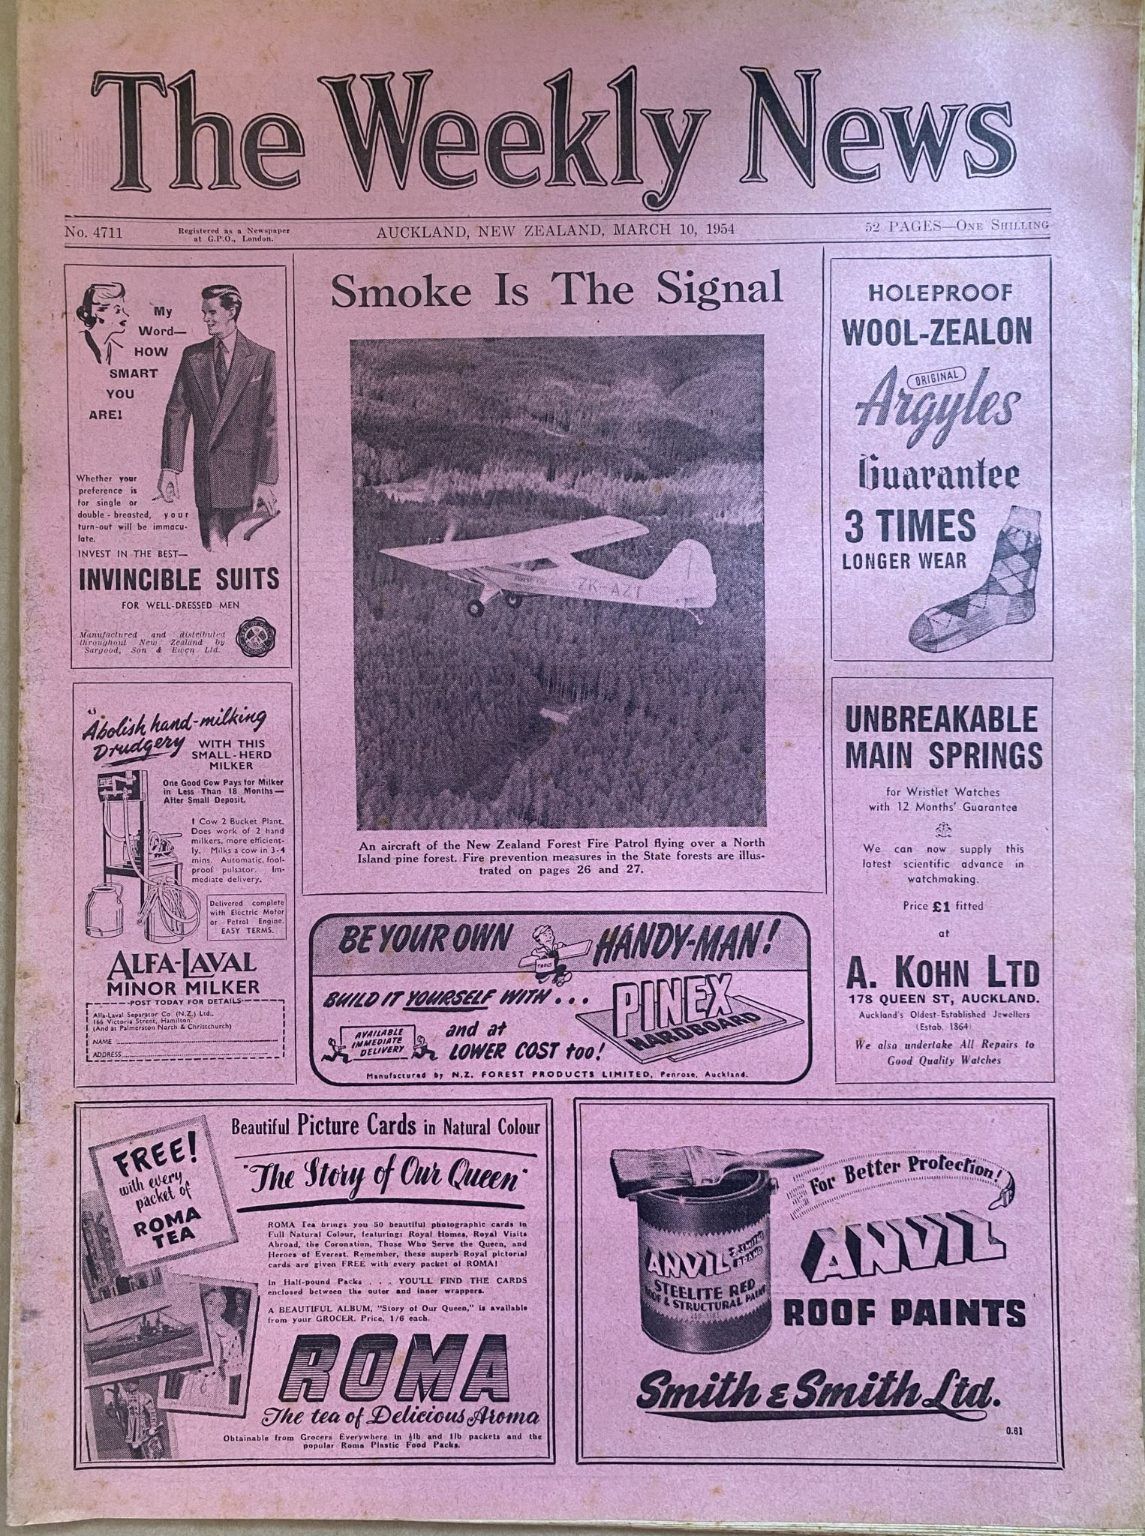 OLD NEWSPAPER: The Weekly News - No. 4711, 10 March 1954